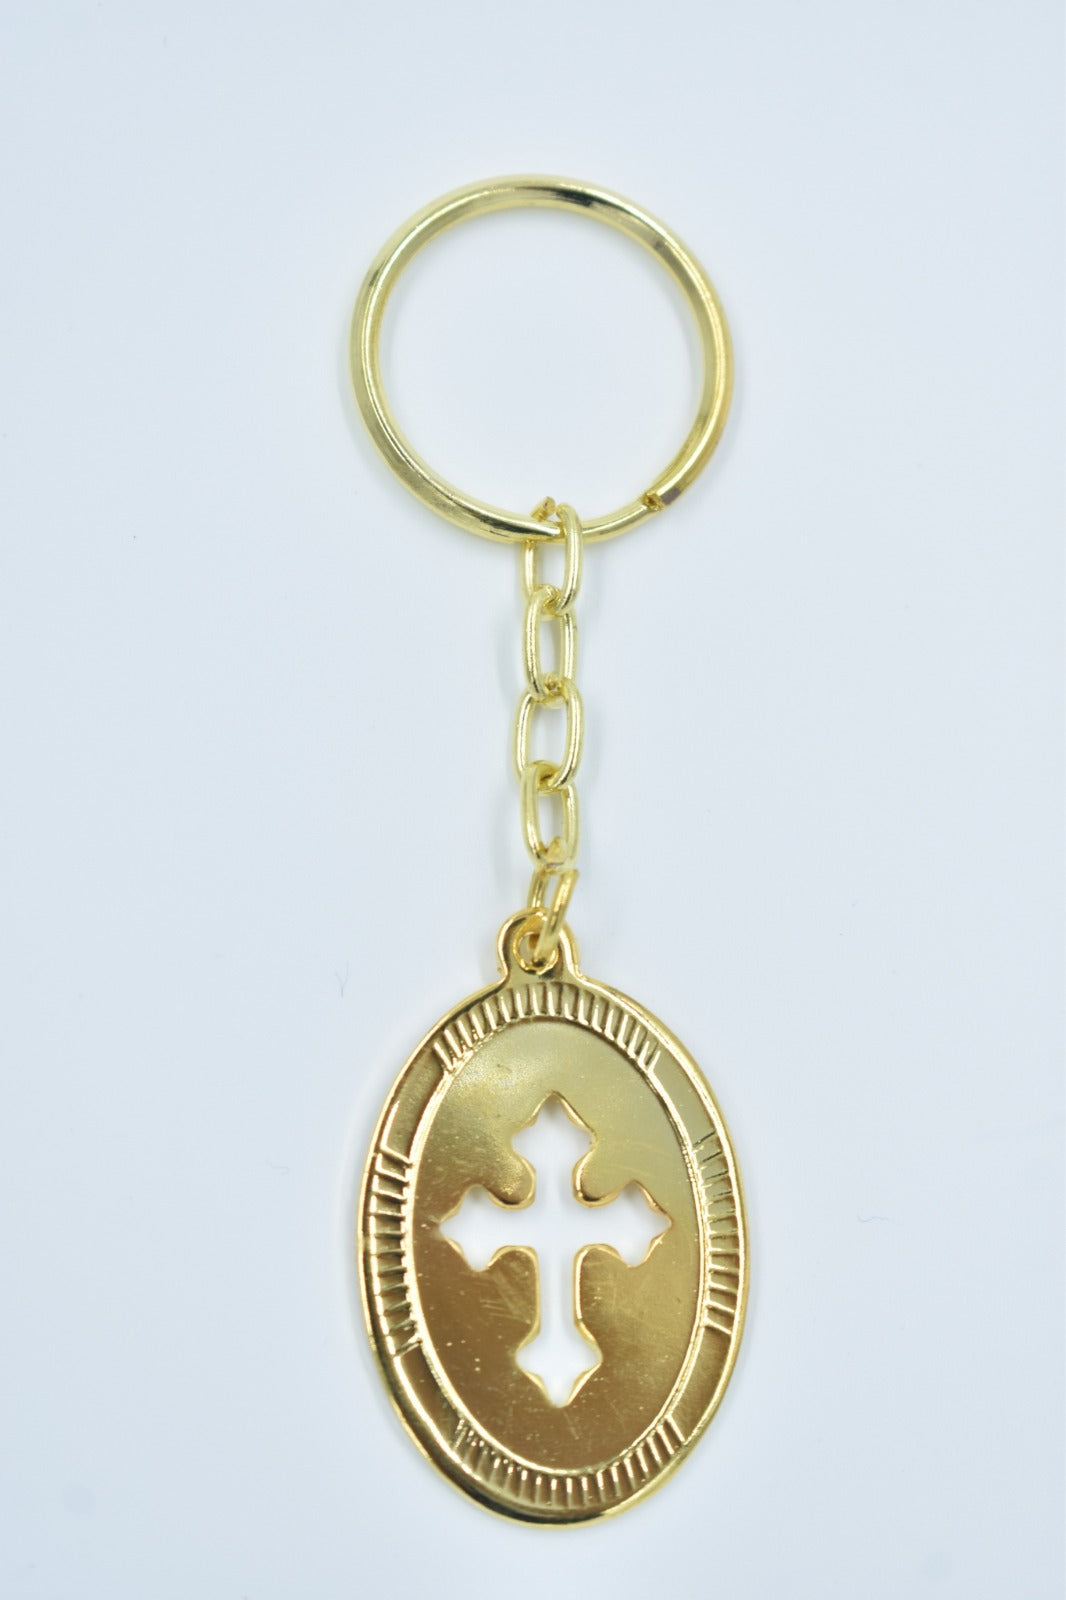 Oval Shaped Key Chain - Gold